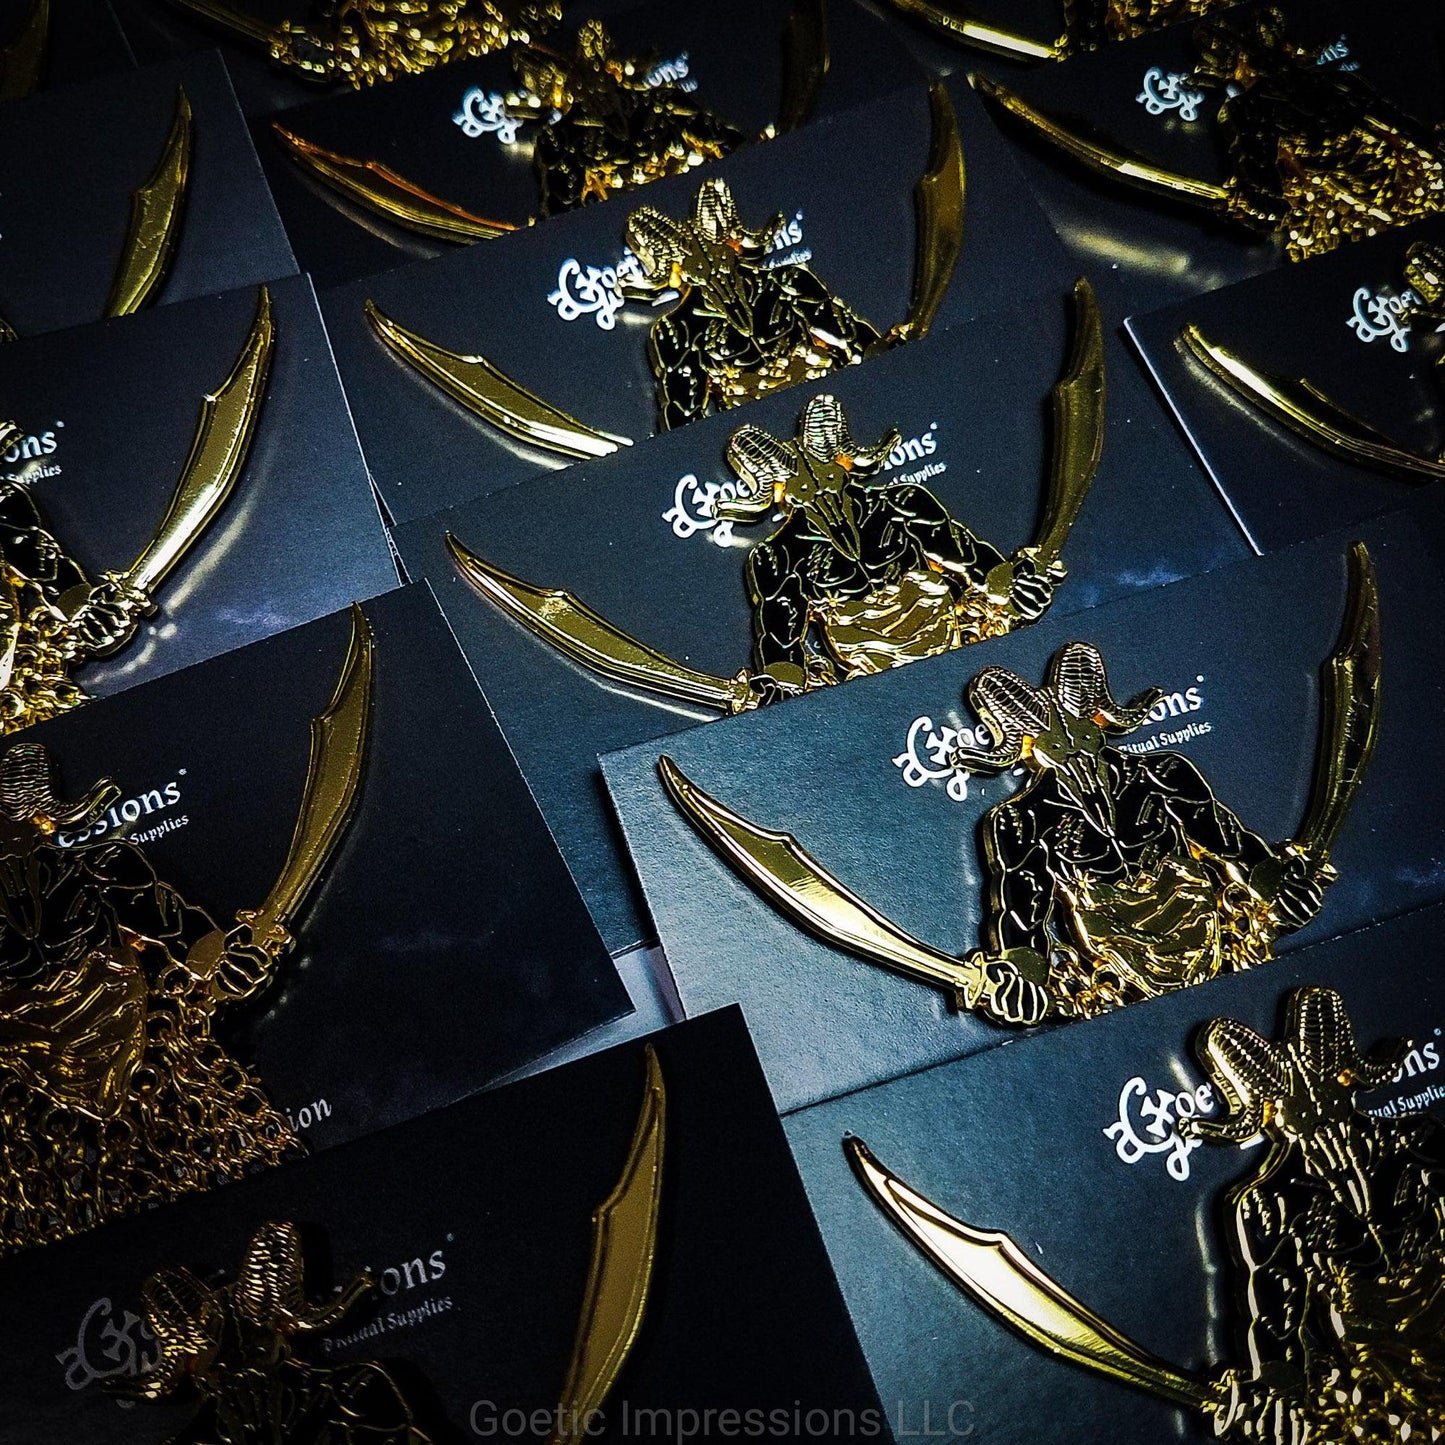 A series of several Azazel pins on card backs ready to be shipped. 